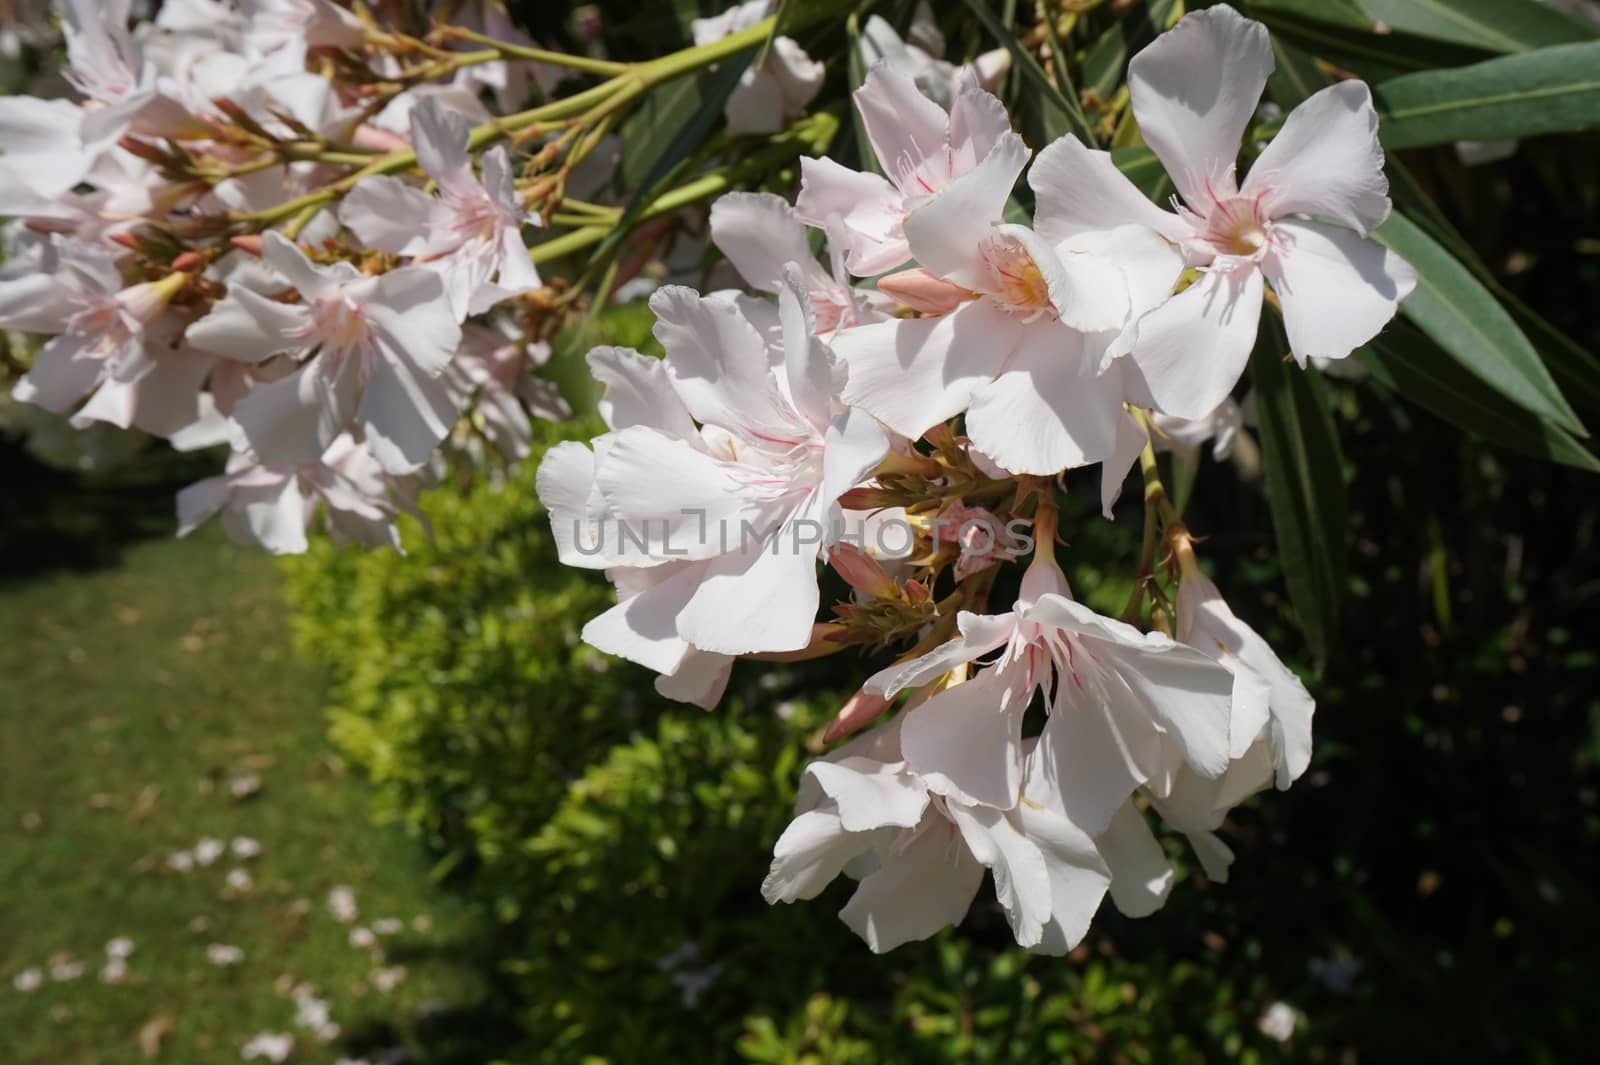 oleander shrub with delicate white flowers, beautiful floral background by claire_lucia